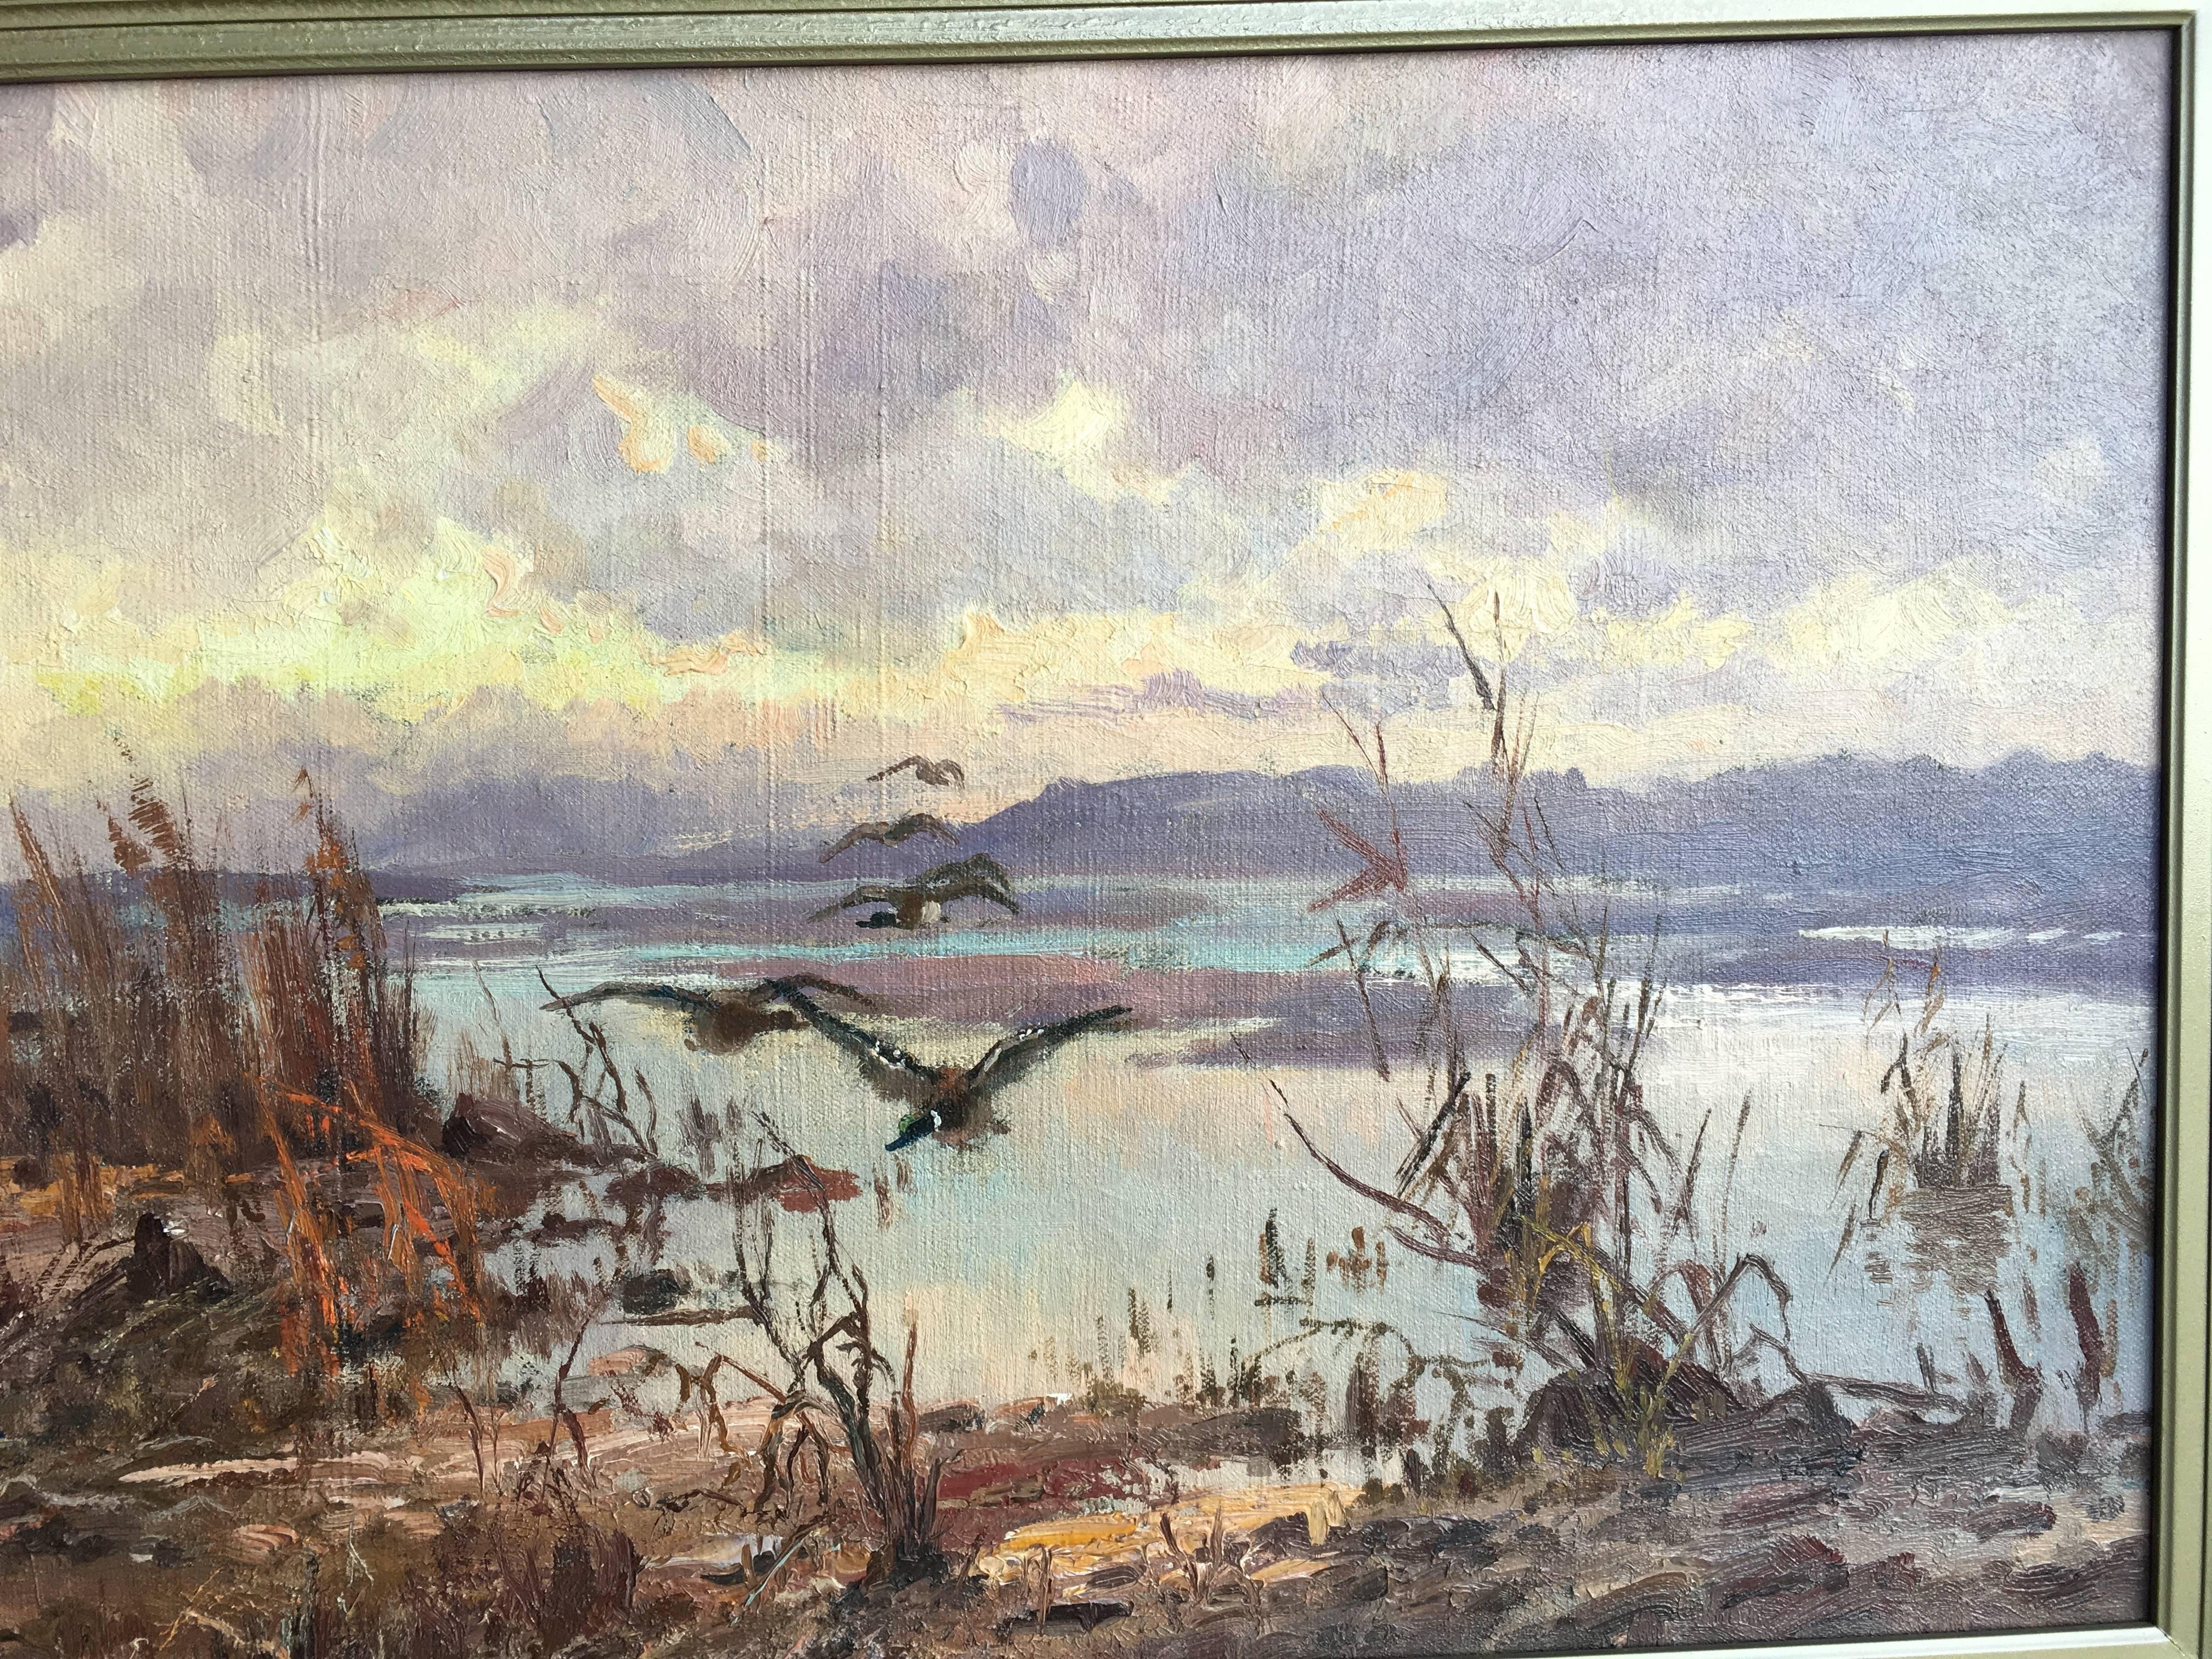 Ducks over the Marsh - American Impressionist Painting by John Fery